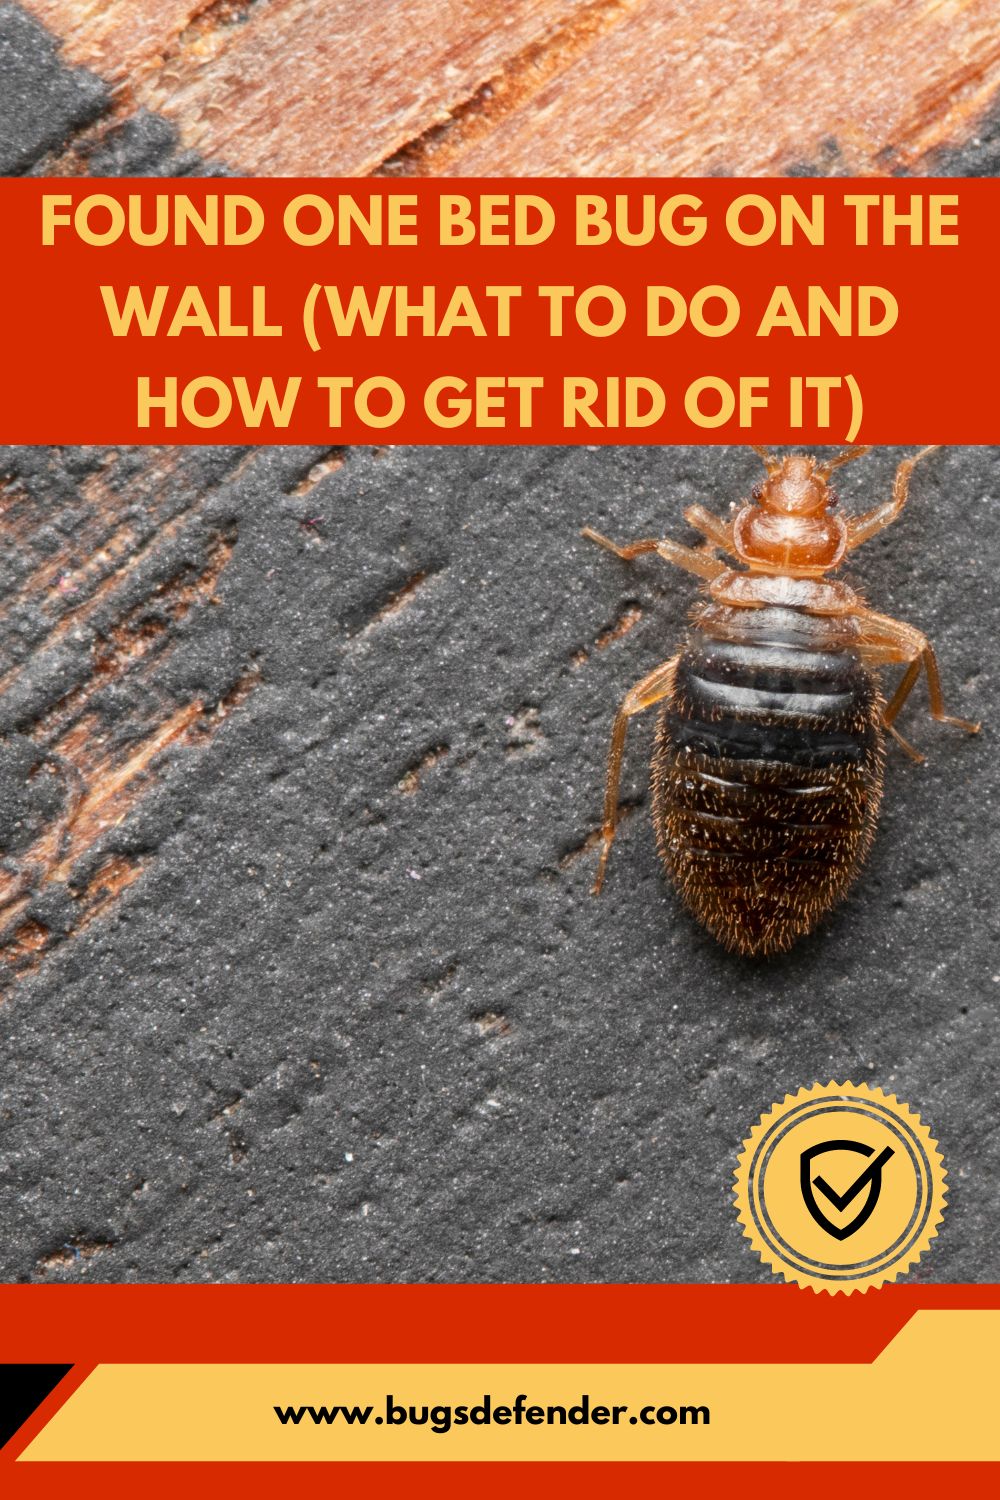 Found One Bed Bug On The Wall (What To Do And How To Get Rid Of It) pin1